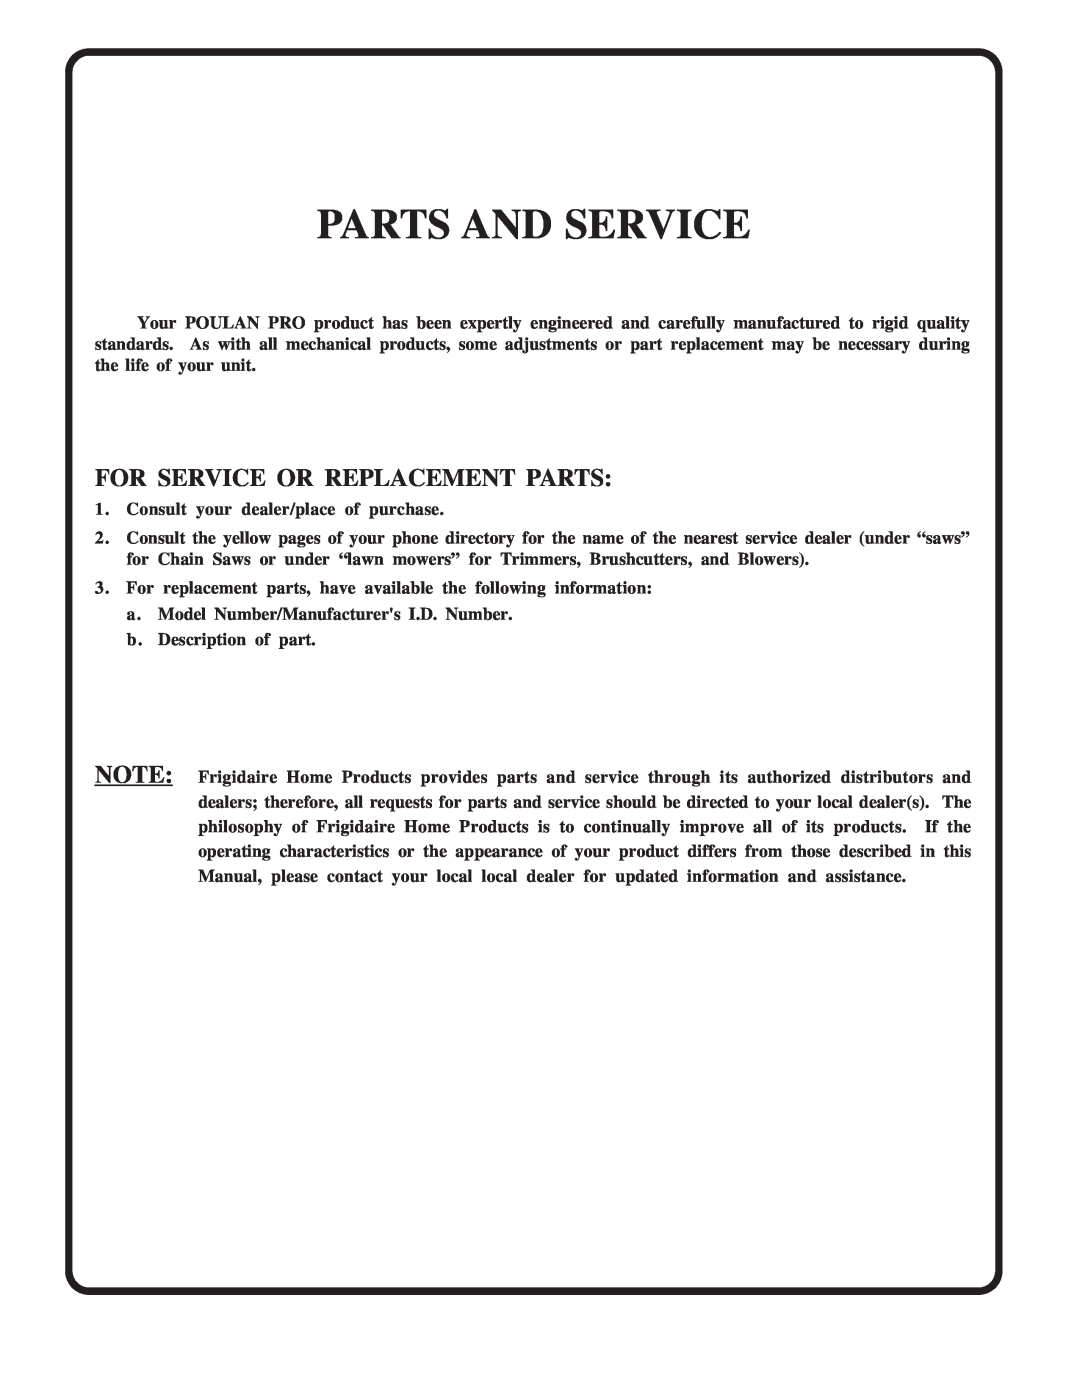 Poulan PR17H42STA, 173304 owner manual Parts And Service, For Service Or Replacement Parts 